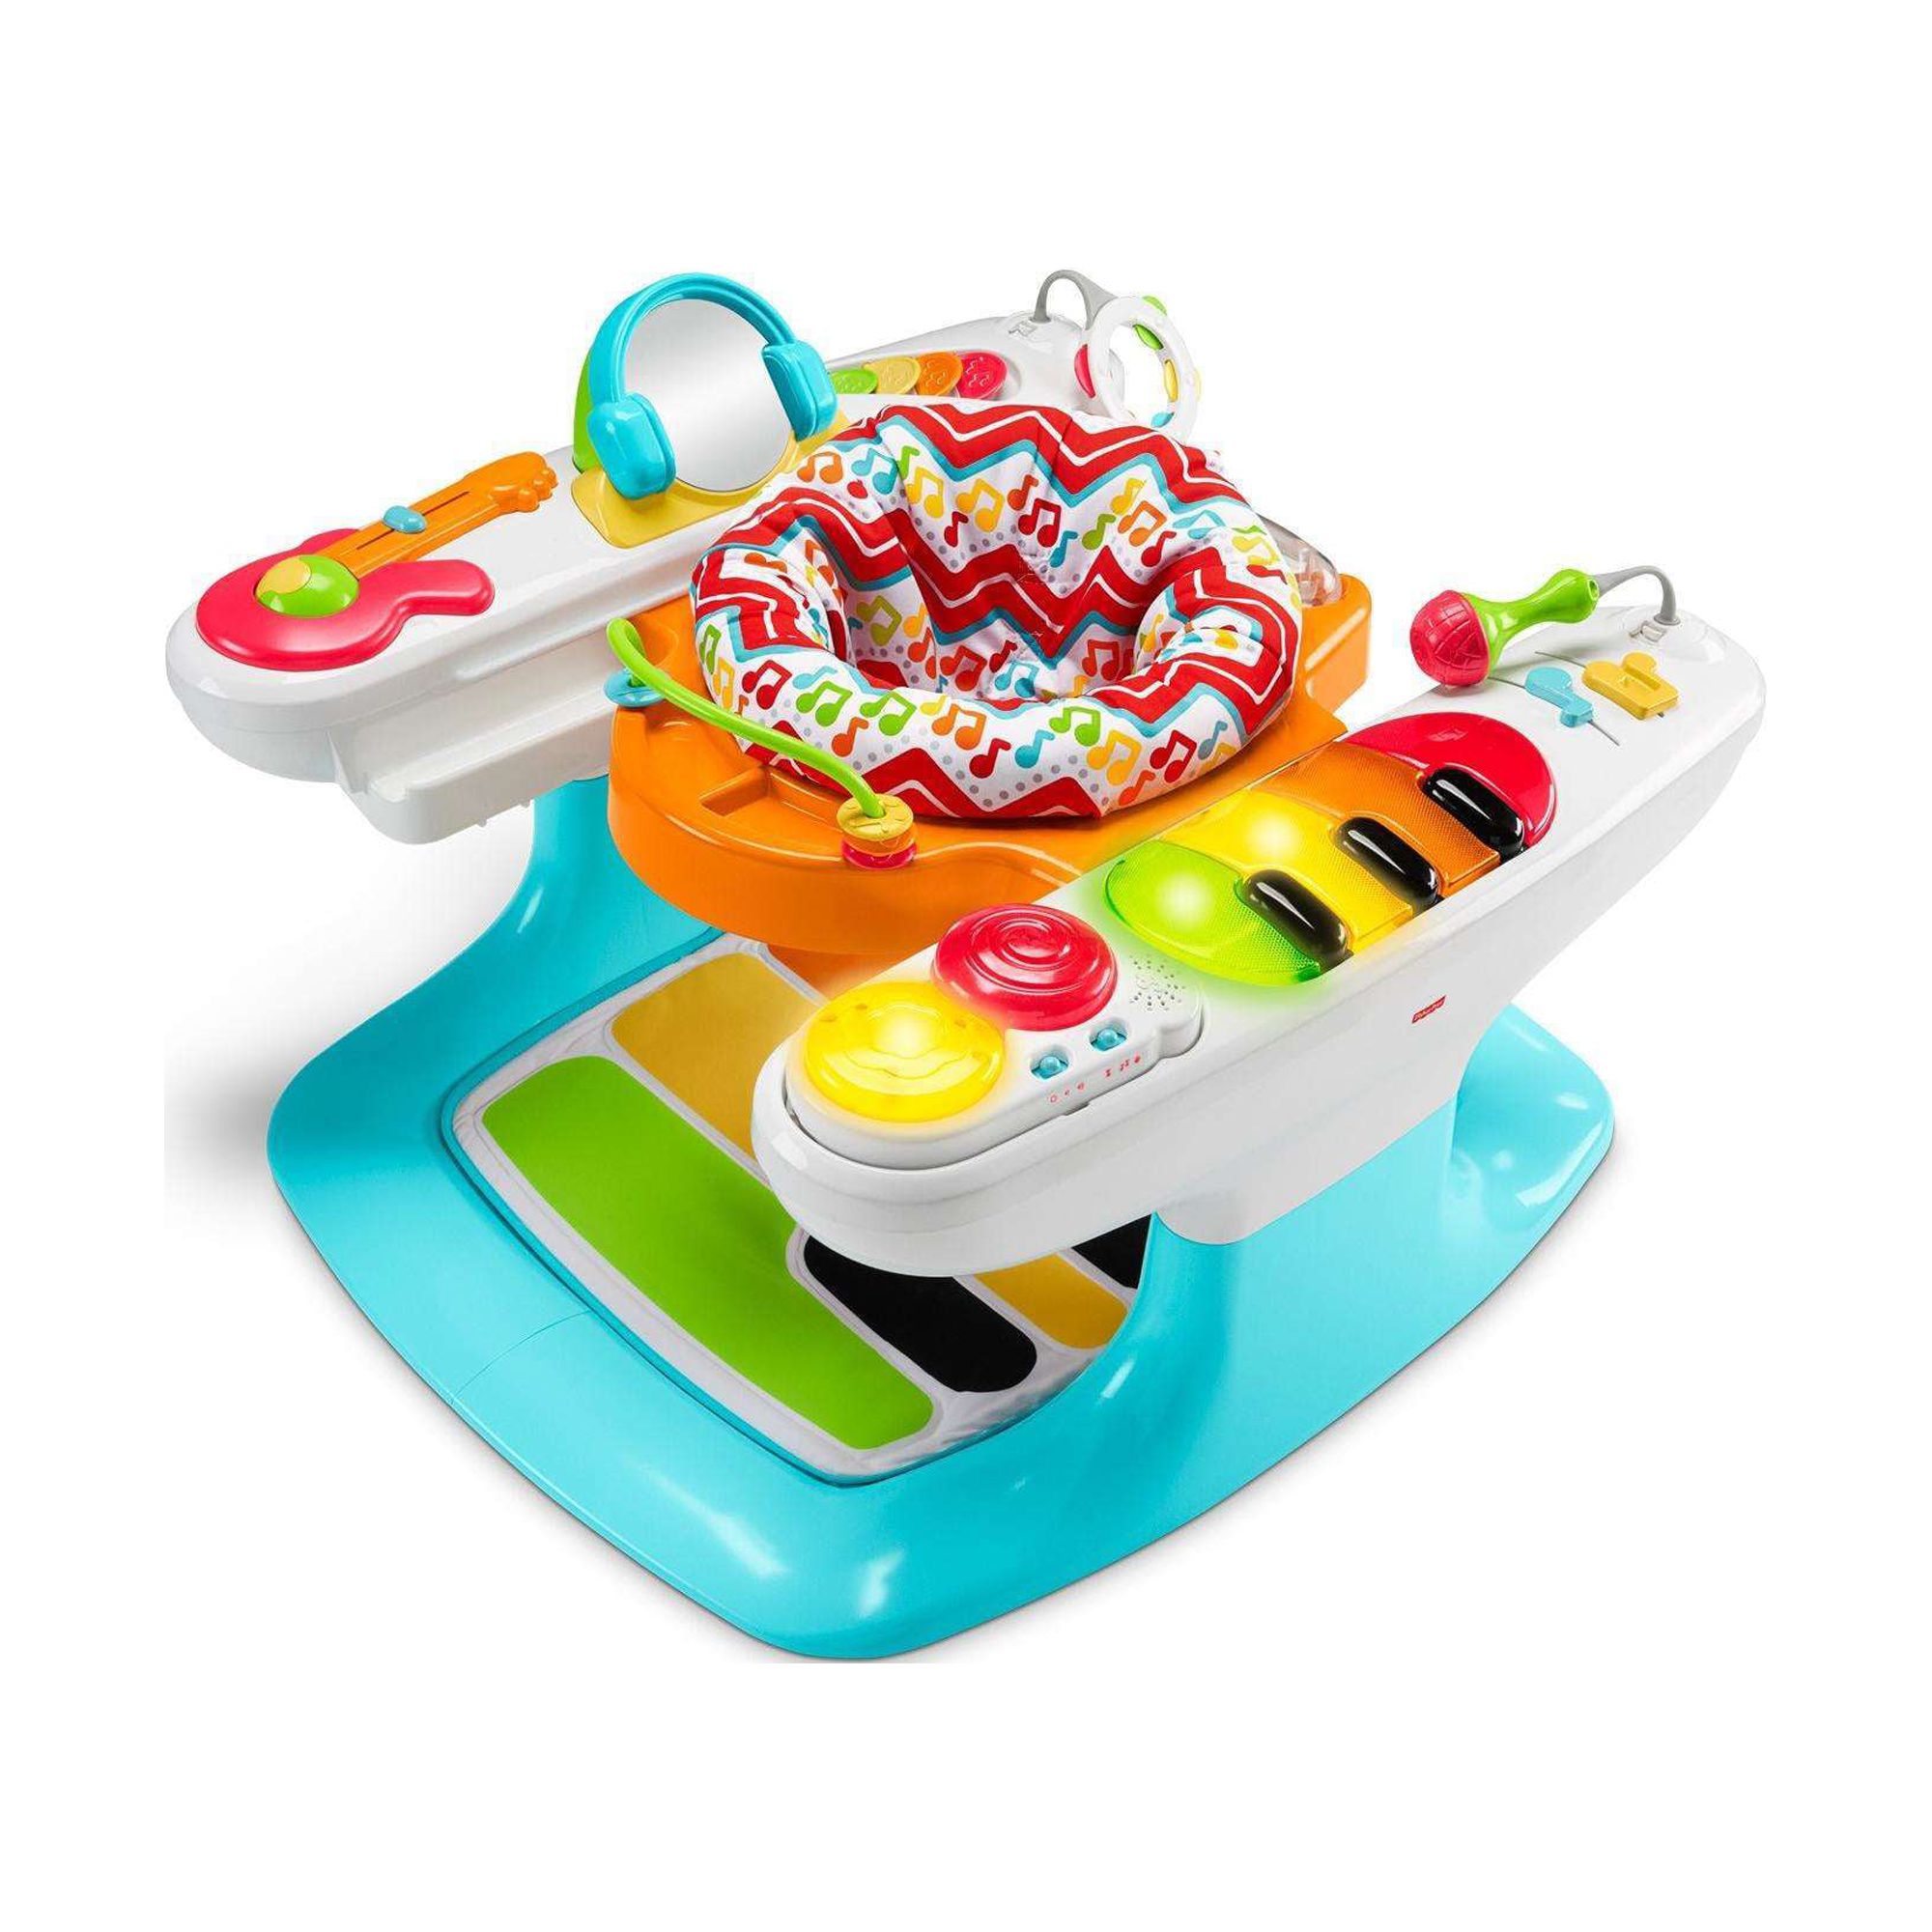 Fisher-Price 4-in-1 Step 'n Play Piano with Lights & Sounds - image 1 of 13